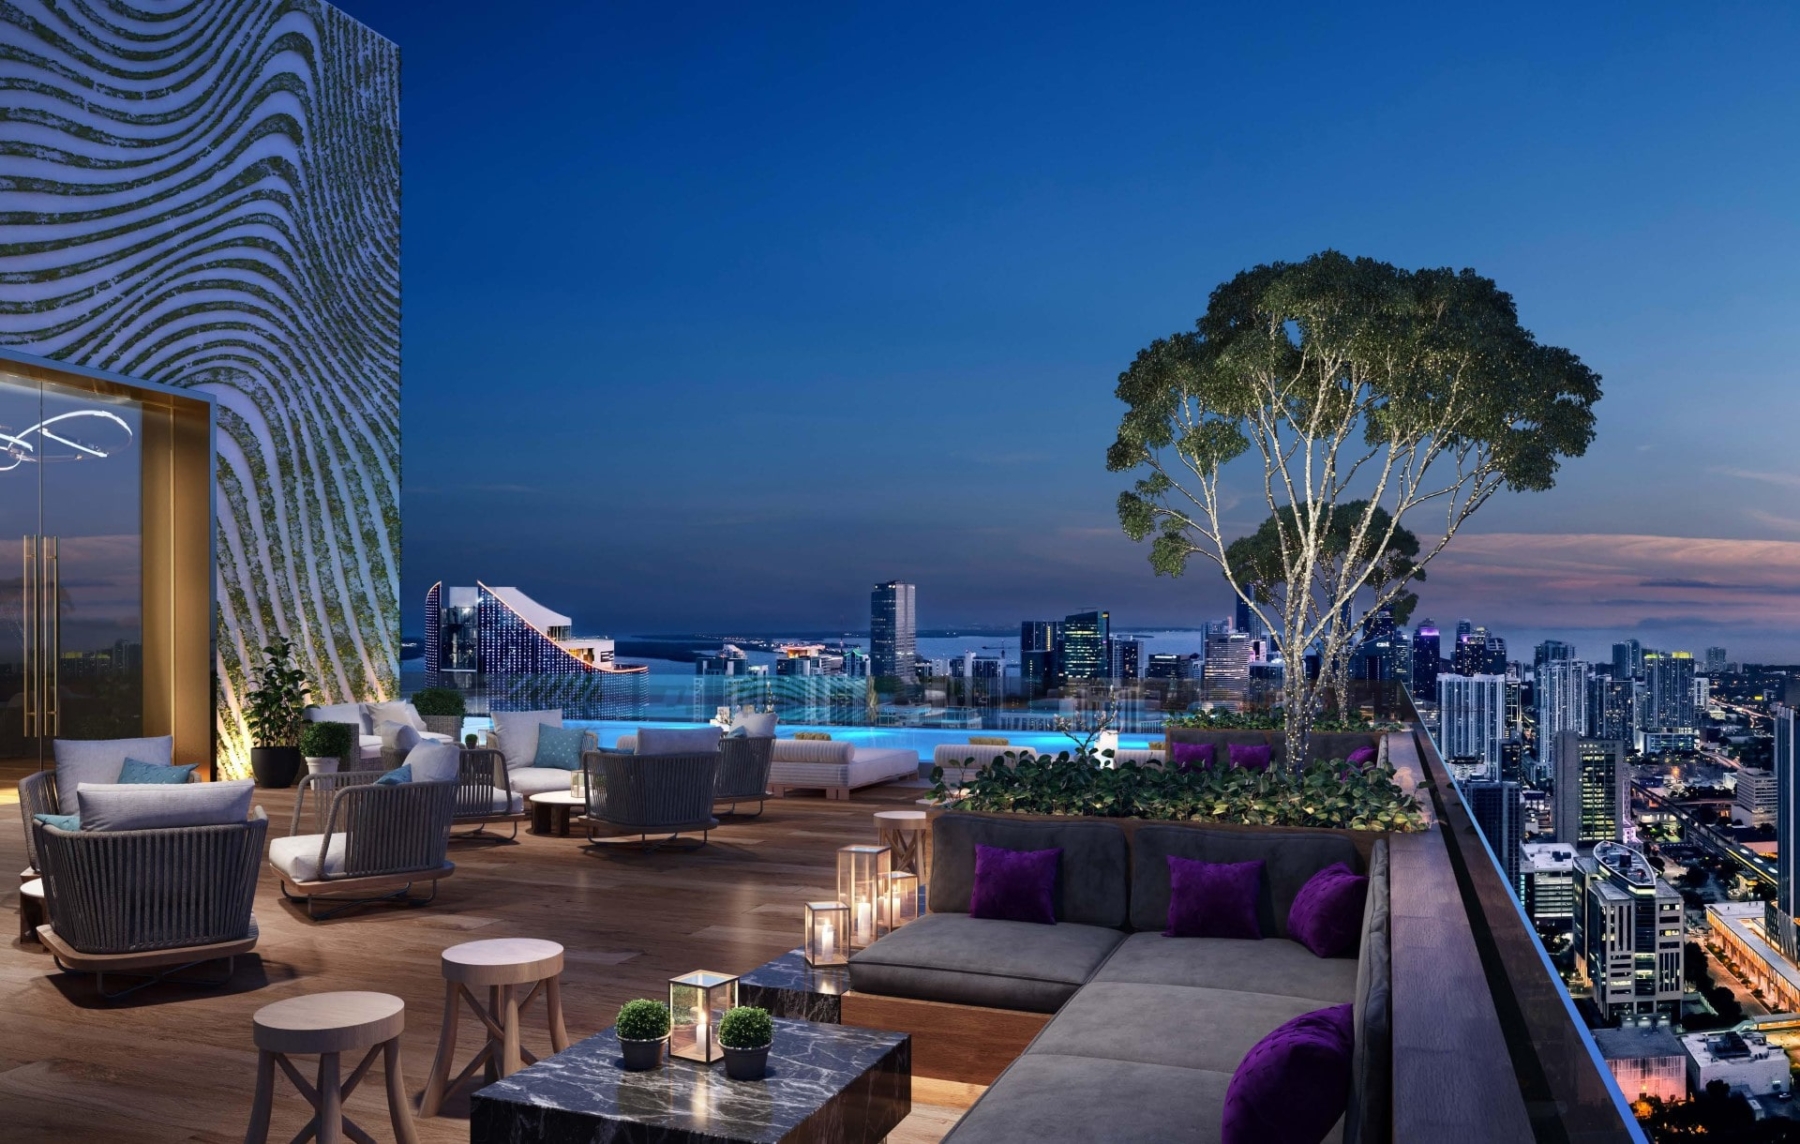 Rendering of E11even Hotel and Residences outdoor terrace at night